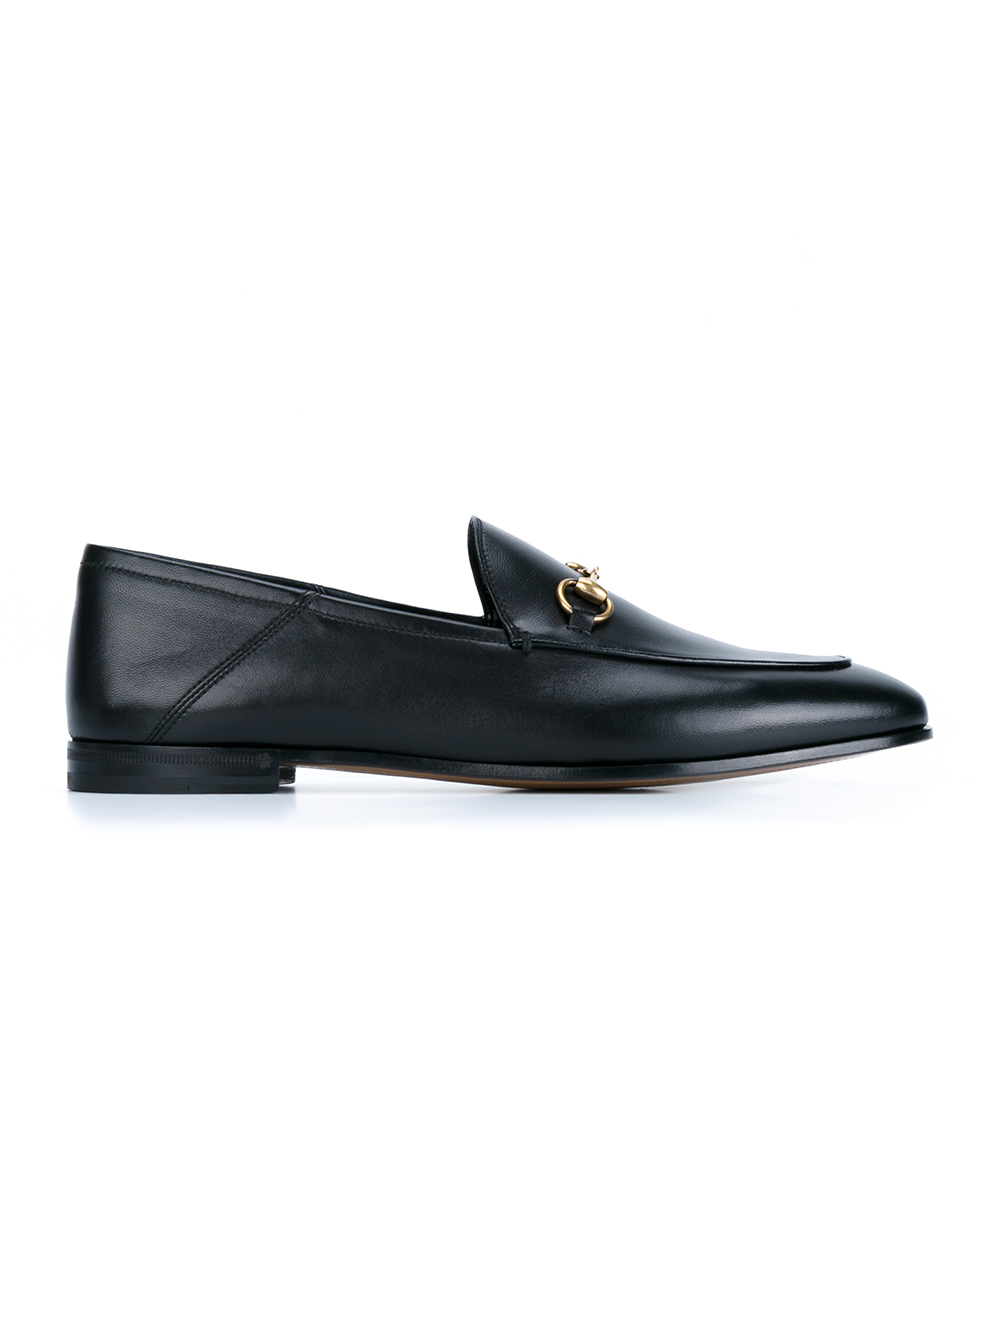 Gucci 'jordaan' Horsebit Leather Loafers in Black for Men - Save 38% | Lyst